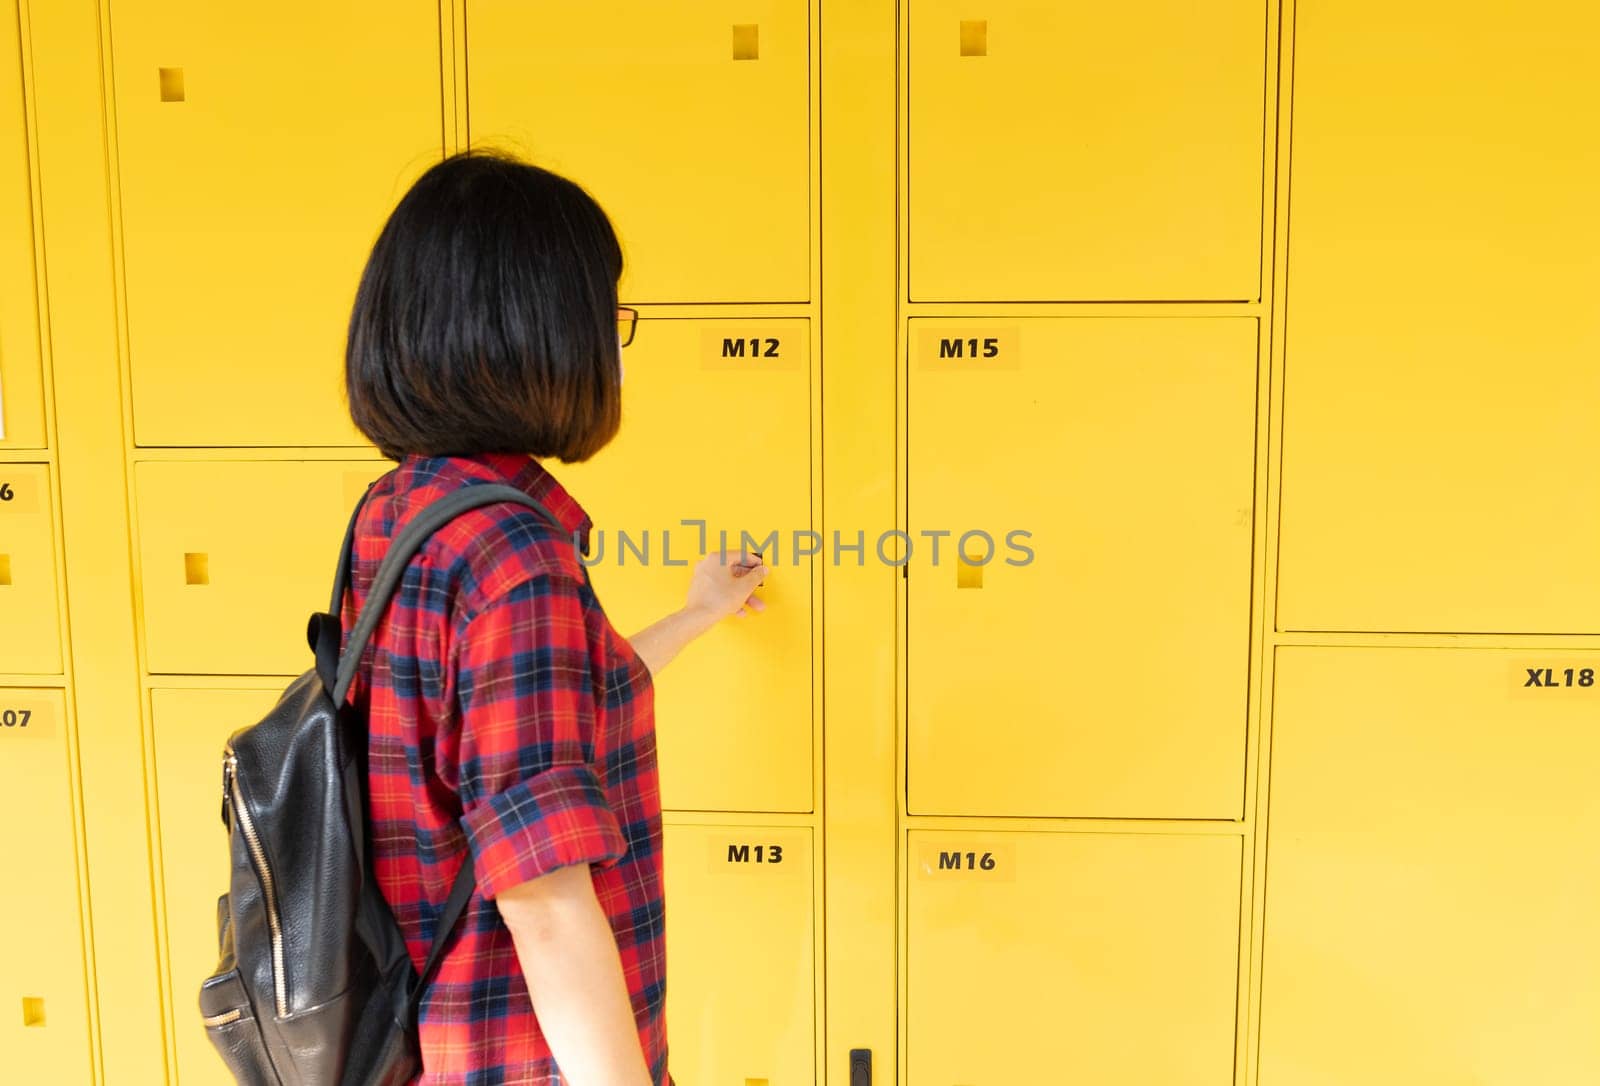 Self-service storage locker. Tourist uses the service of automated locker storage. Luggage and parcel delivery service. Package locker. Mass transit system. Hour and daily storage of items luggages.